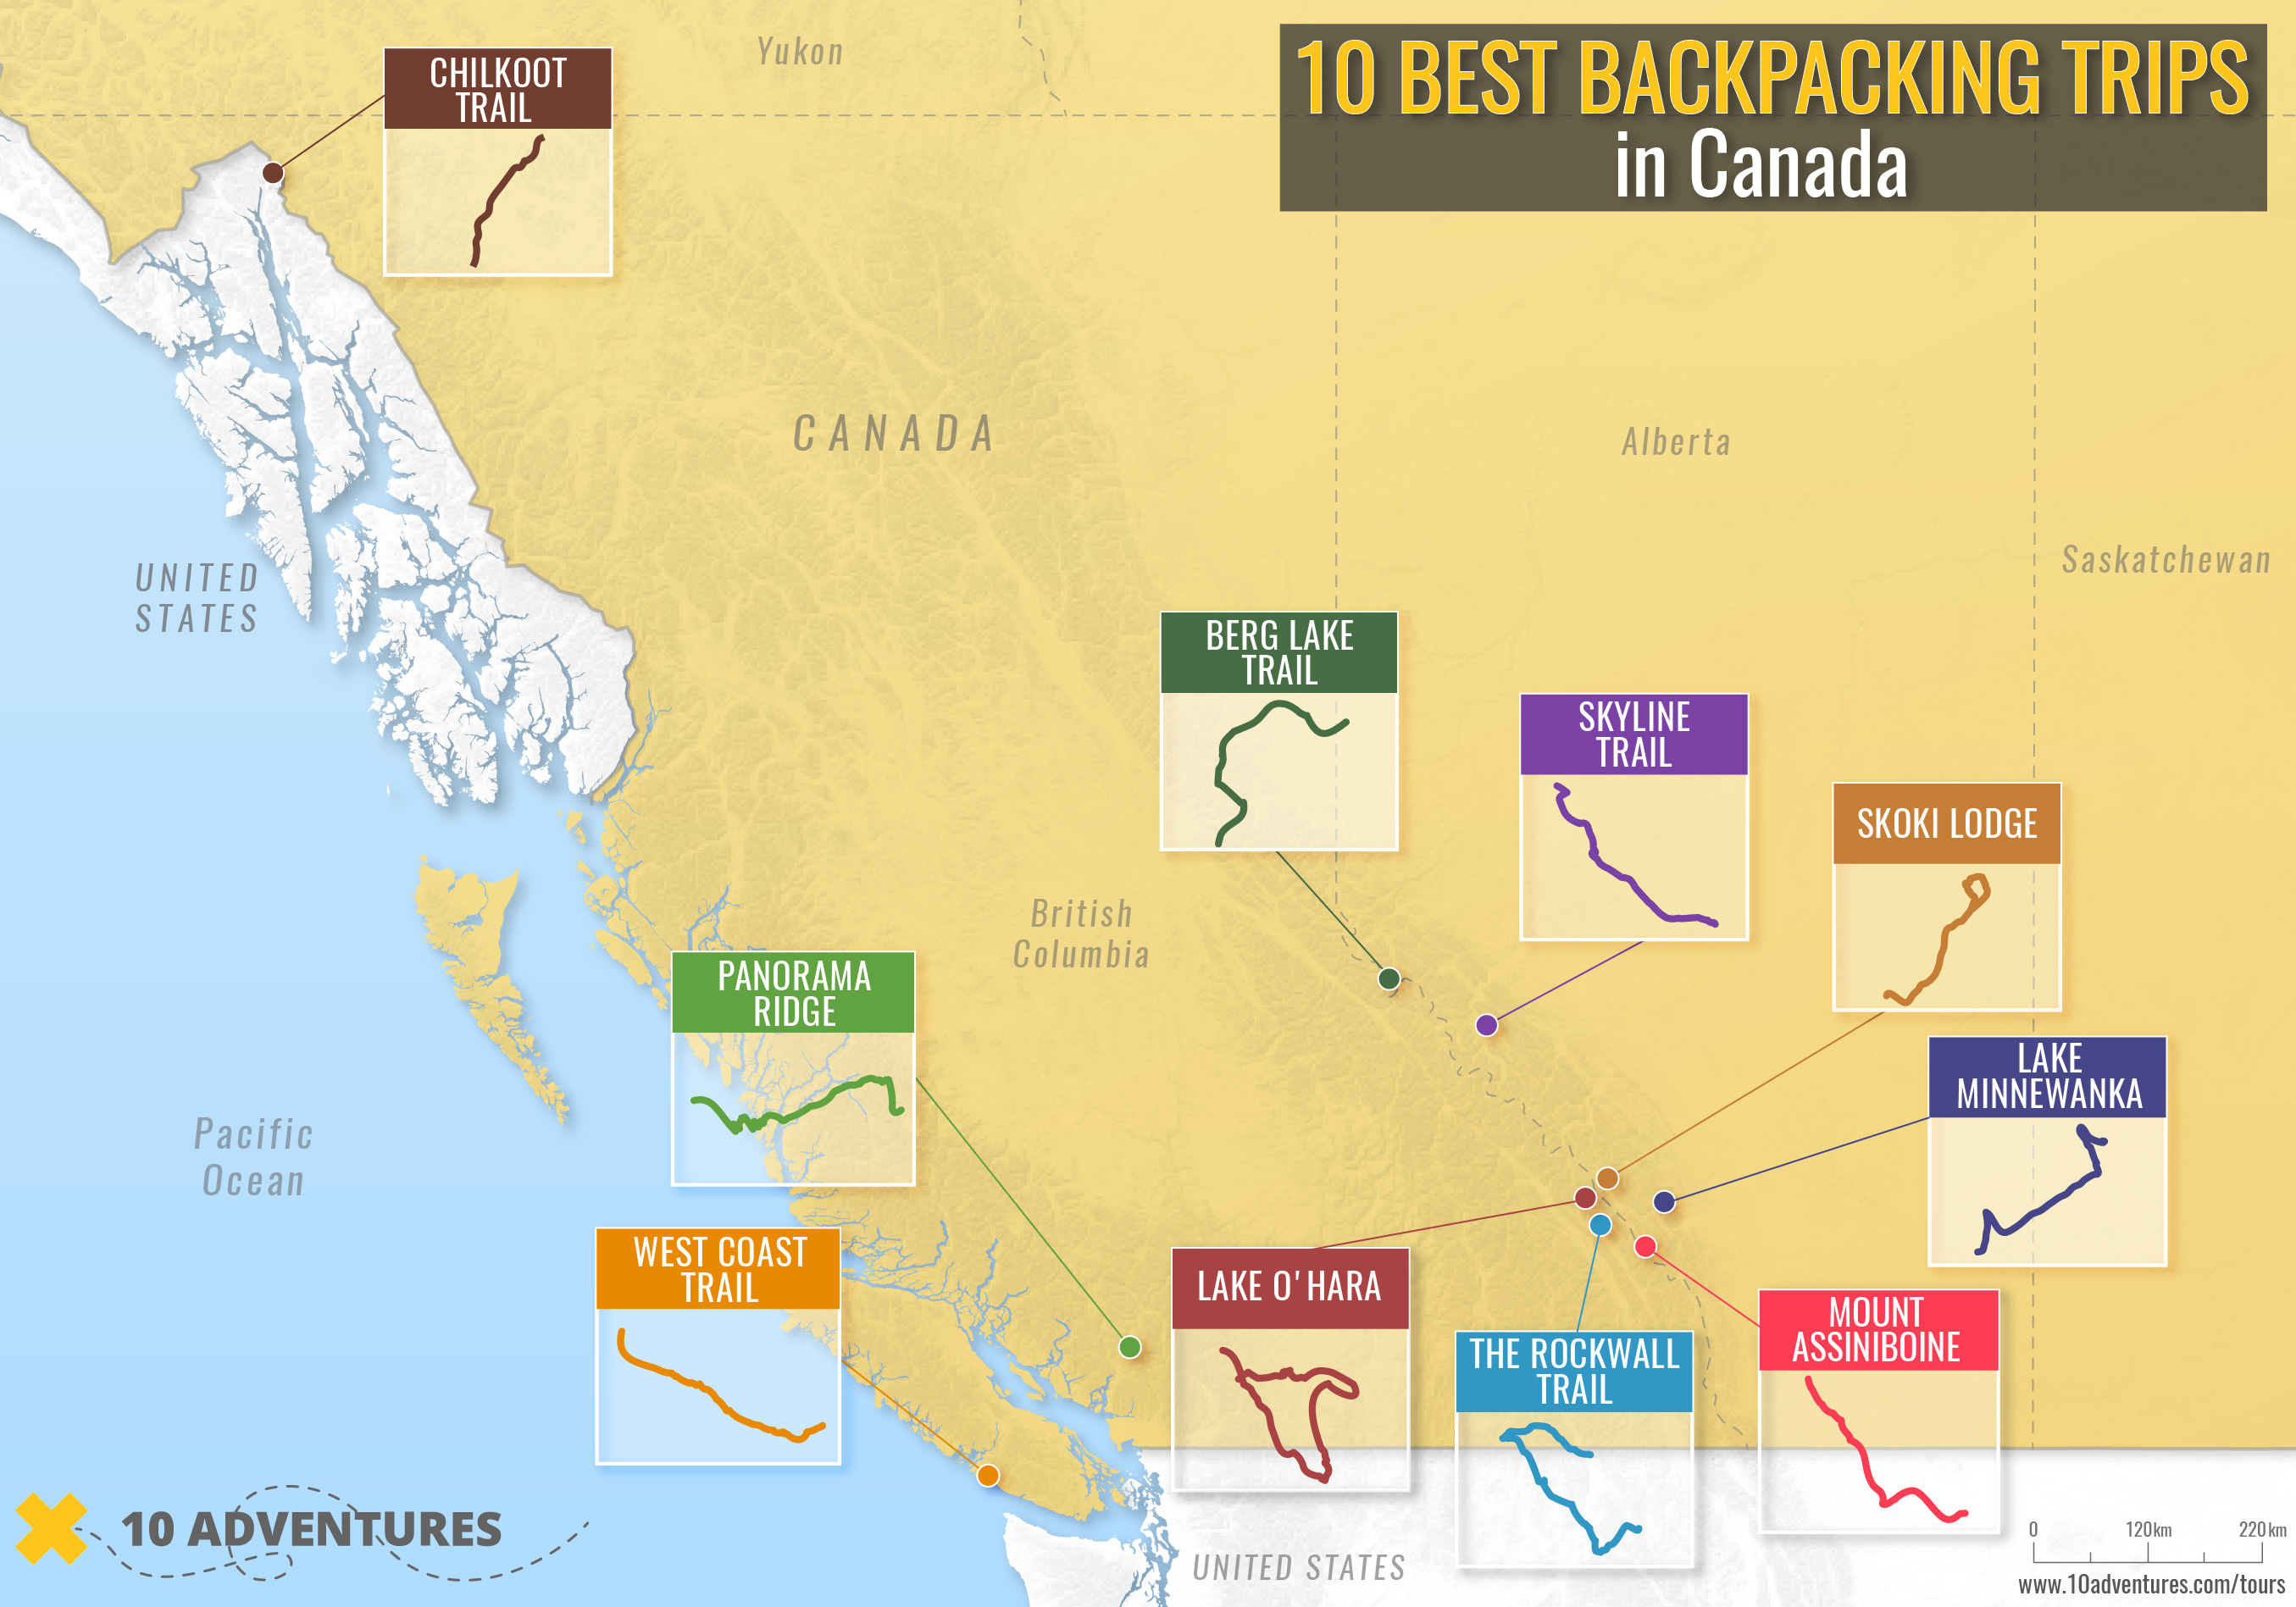 10 Best Backpacking Trips in Canada